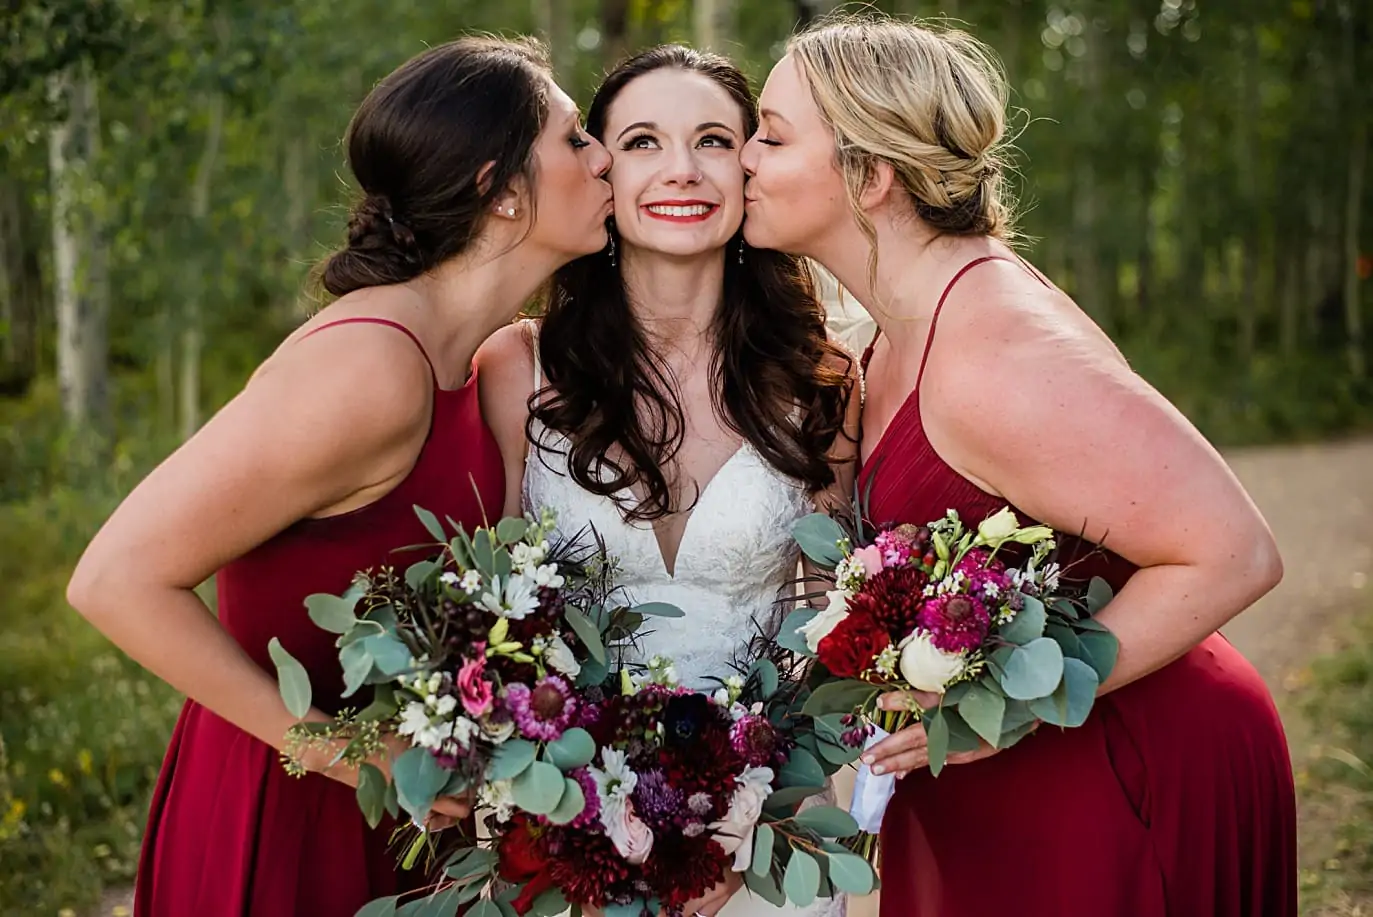 two bridesmaids kiss bride on cheek prior to her wedding ceremony on the top of a mountain